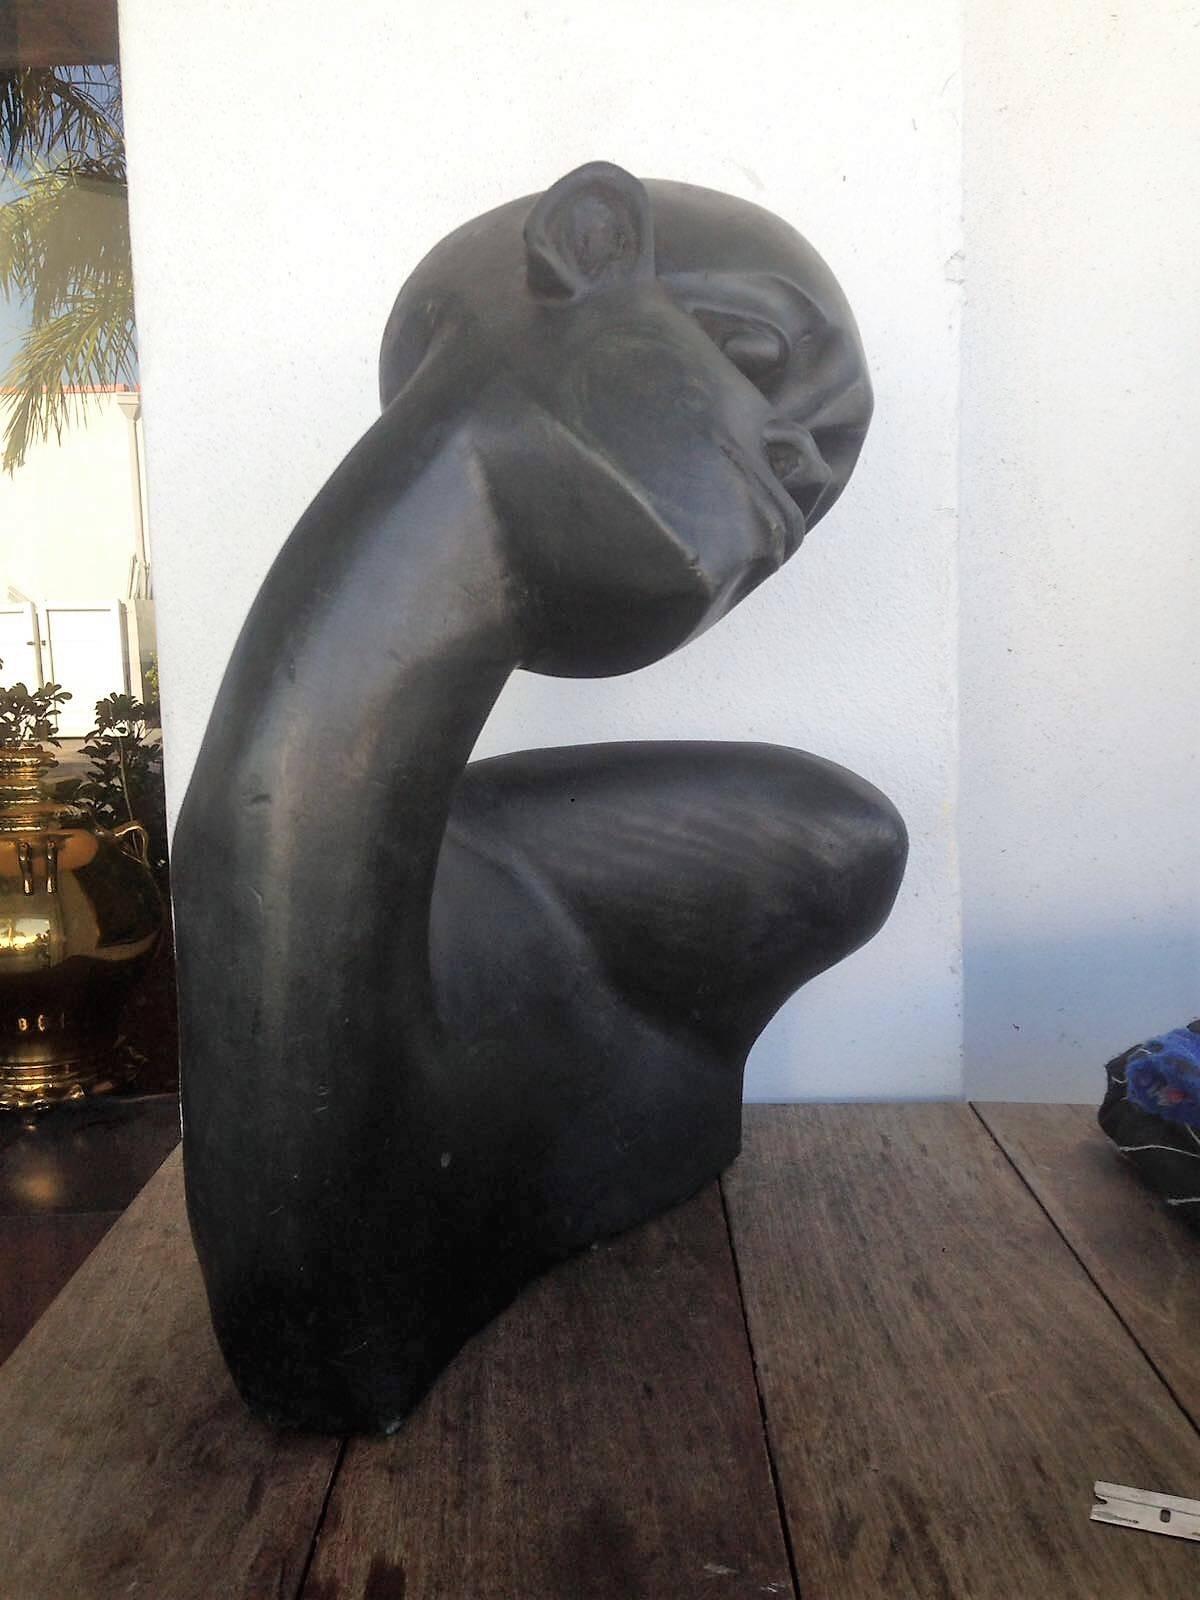 Beautiful carved ebony wood bust of African. This piece is a fine example of traditional wood carving techniques. Extremely powerful specimen with a lot of visual interest and presence.